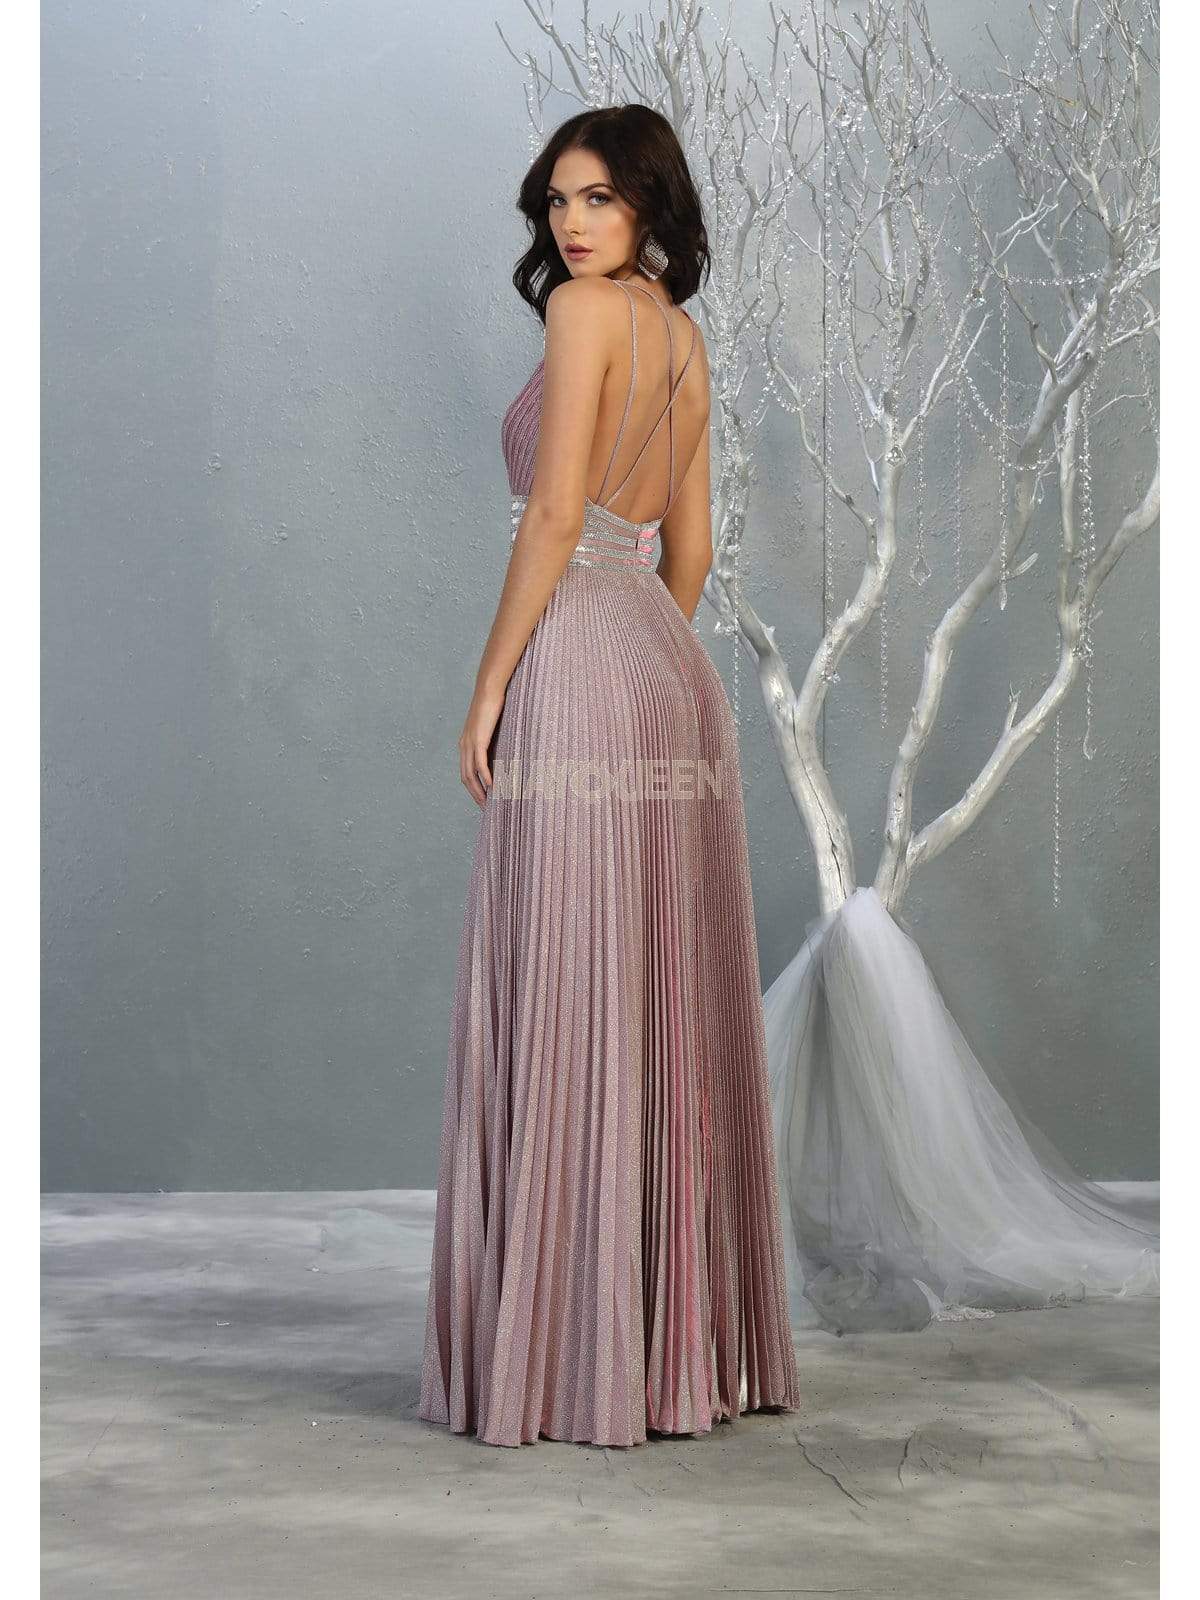 May Queen - RQ7828 Strappy Plunging V-Neck A-Line Dress Evening Dresses